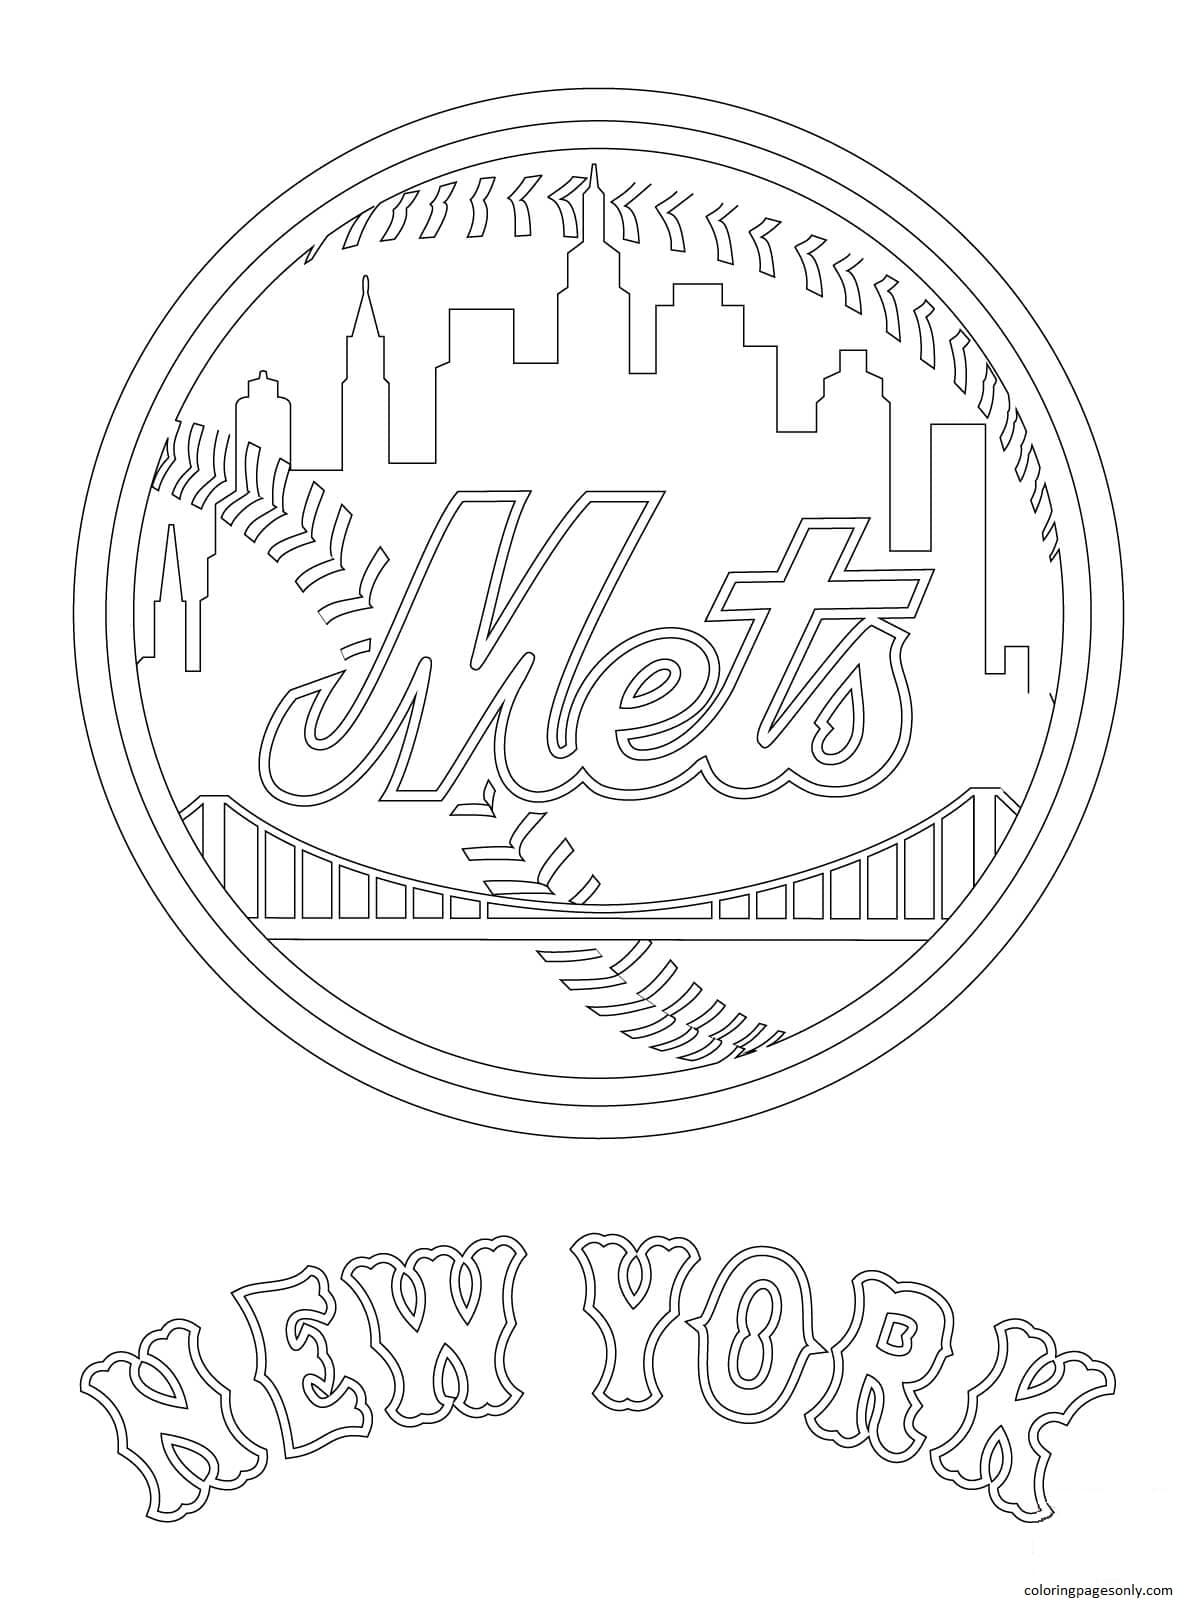 New York Mets Logo Coloring Pages